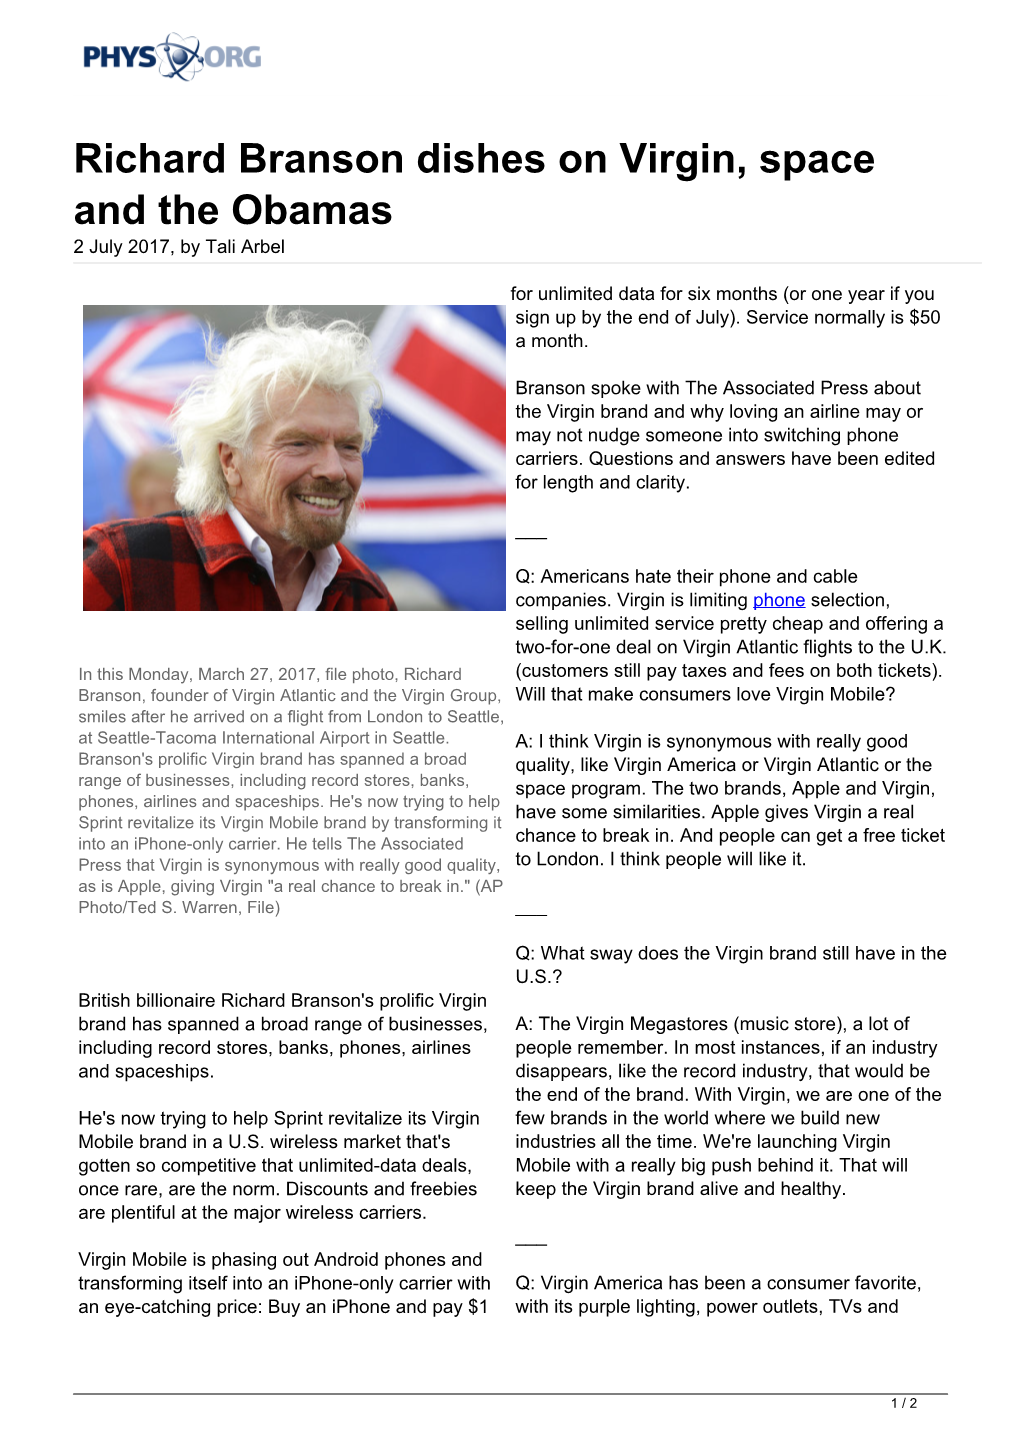 Richard Branson Dishes on Virgin, Space and the Obamas 2 July 2017, by Tali Arbel